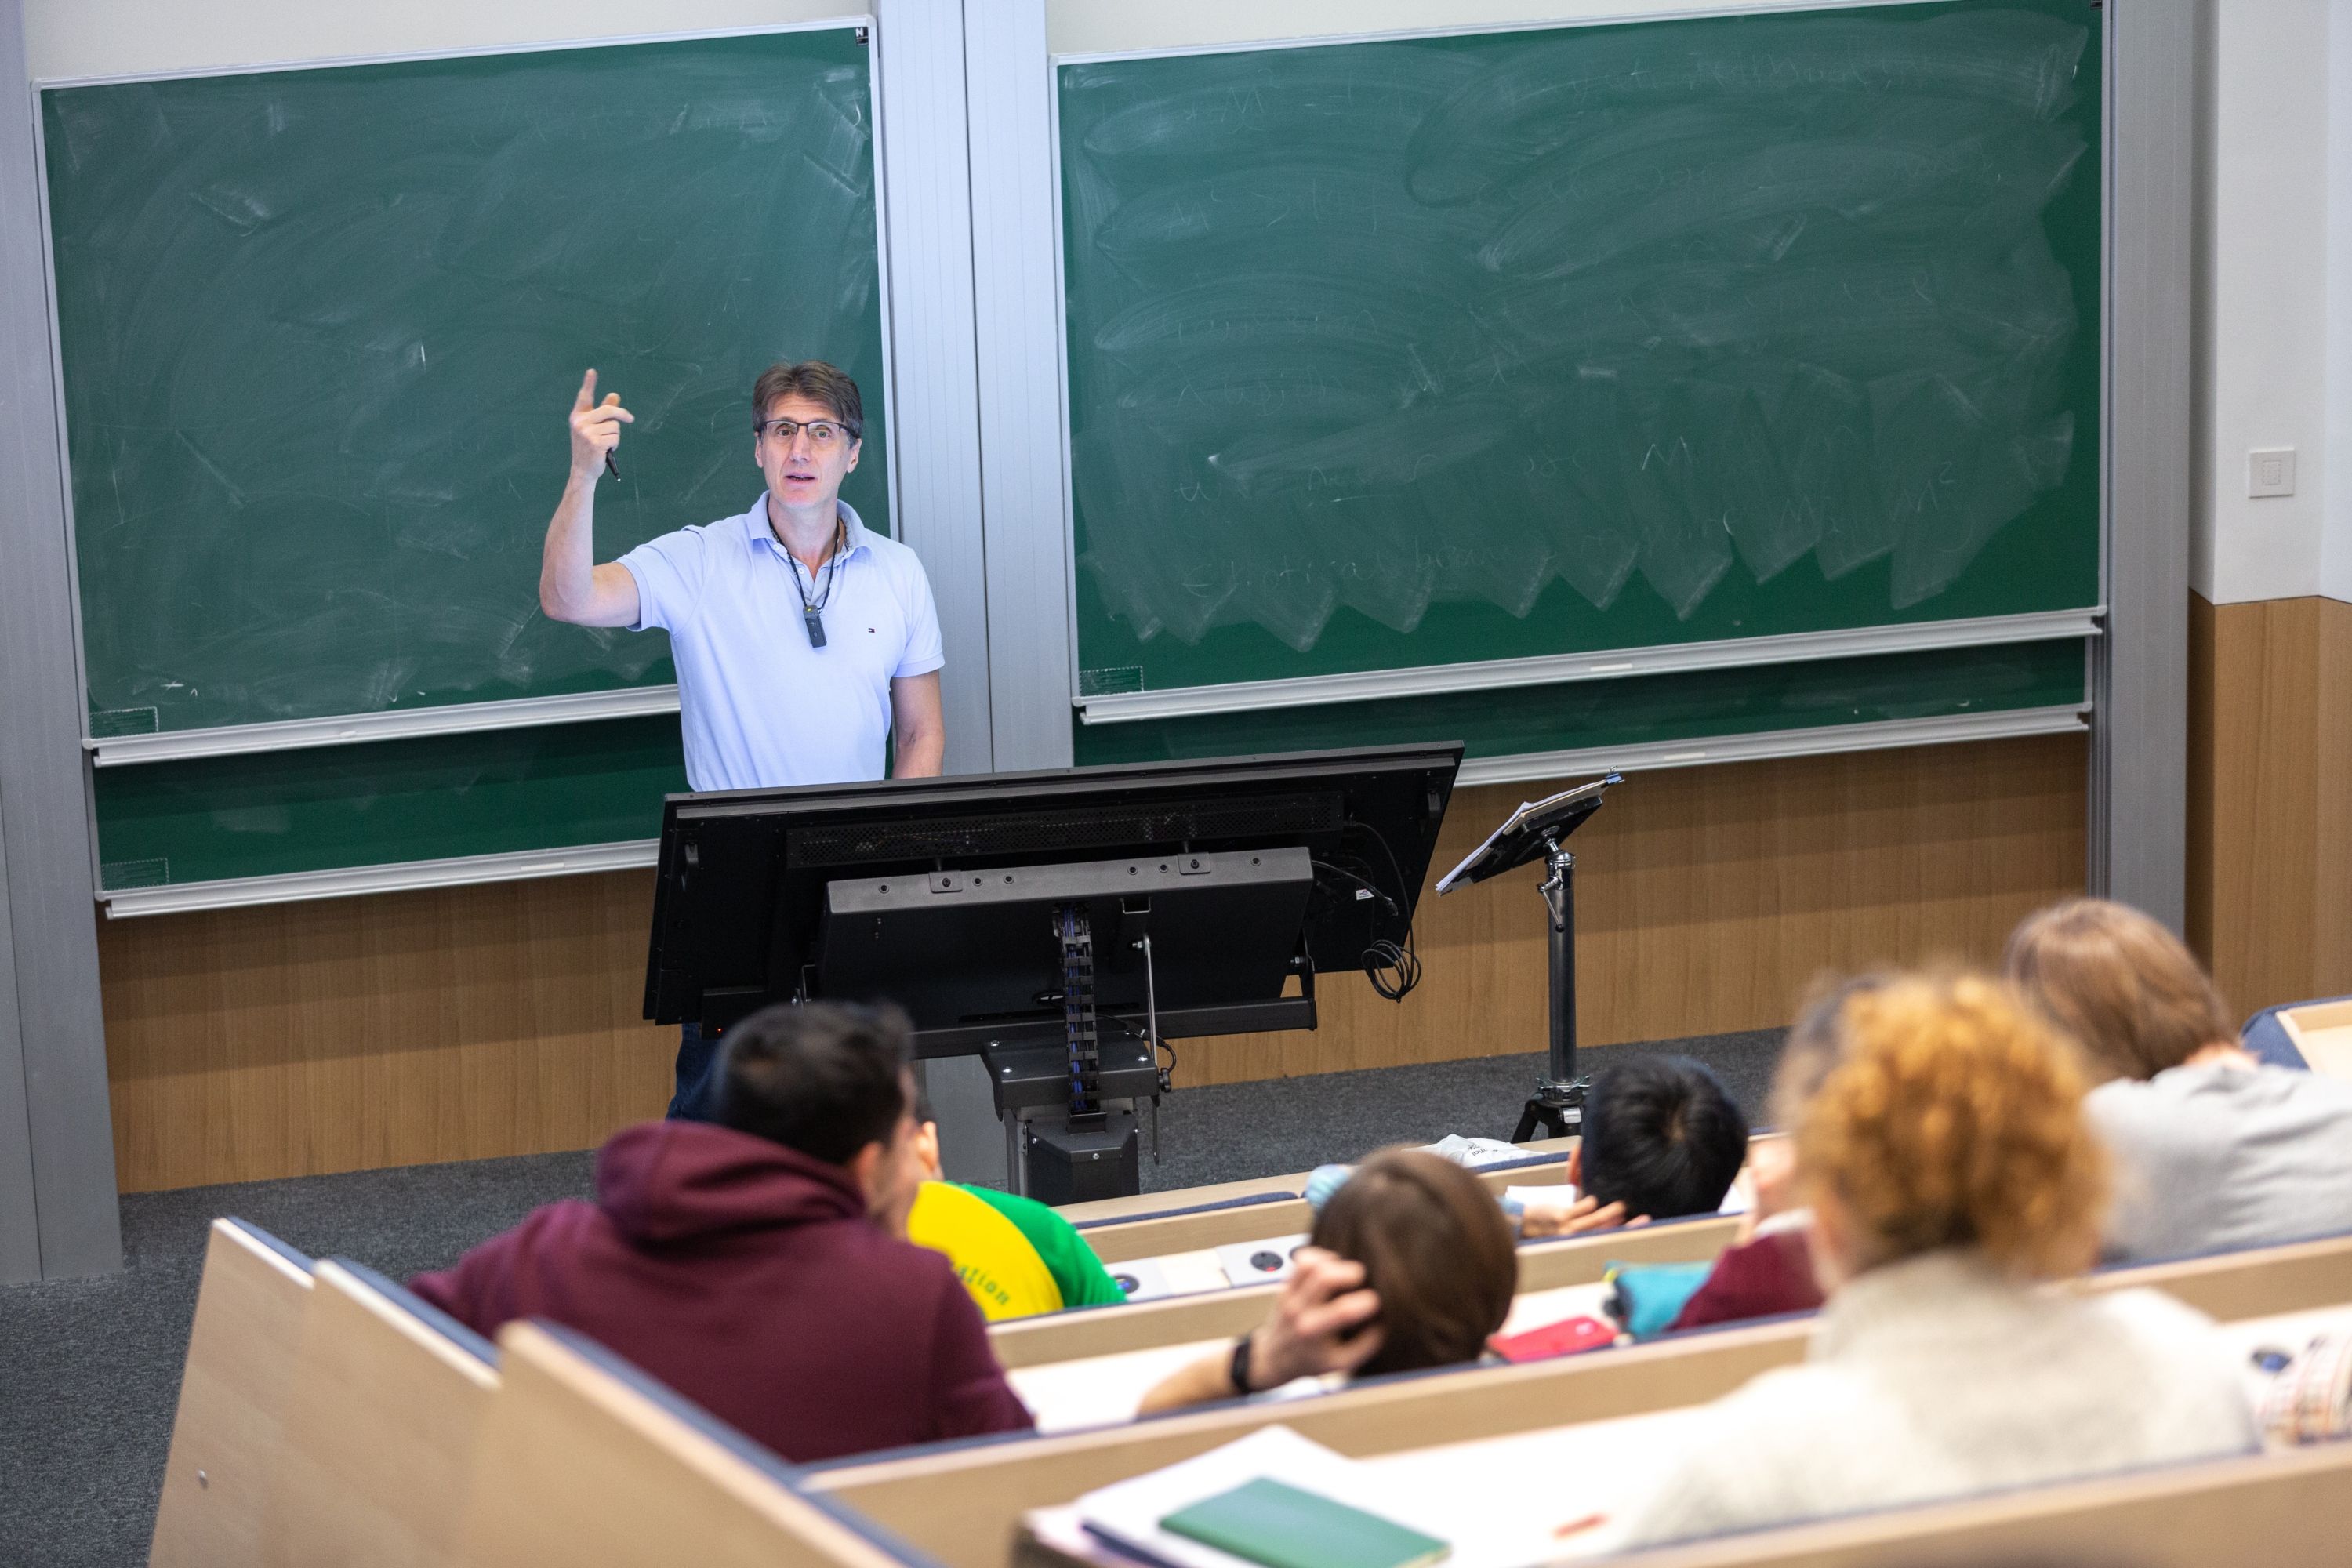 A lecturer speaking to a class